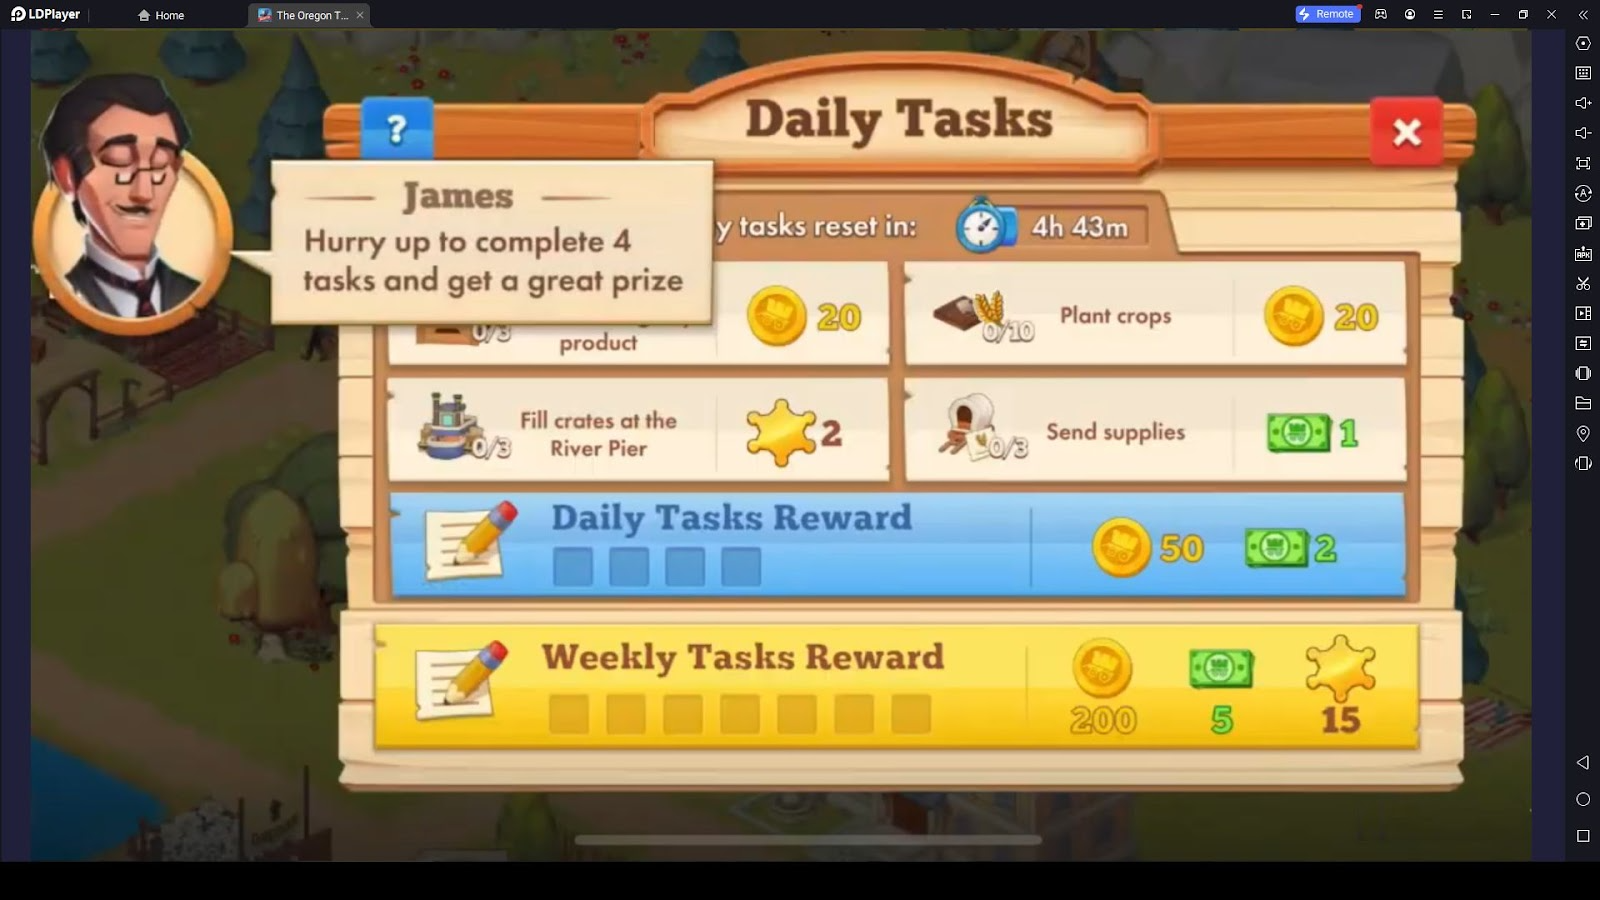 Missions and Tasks